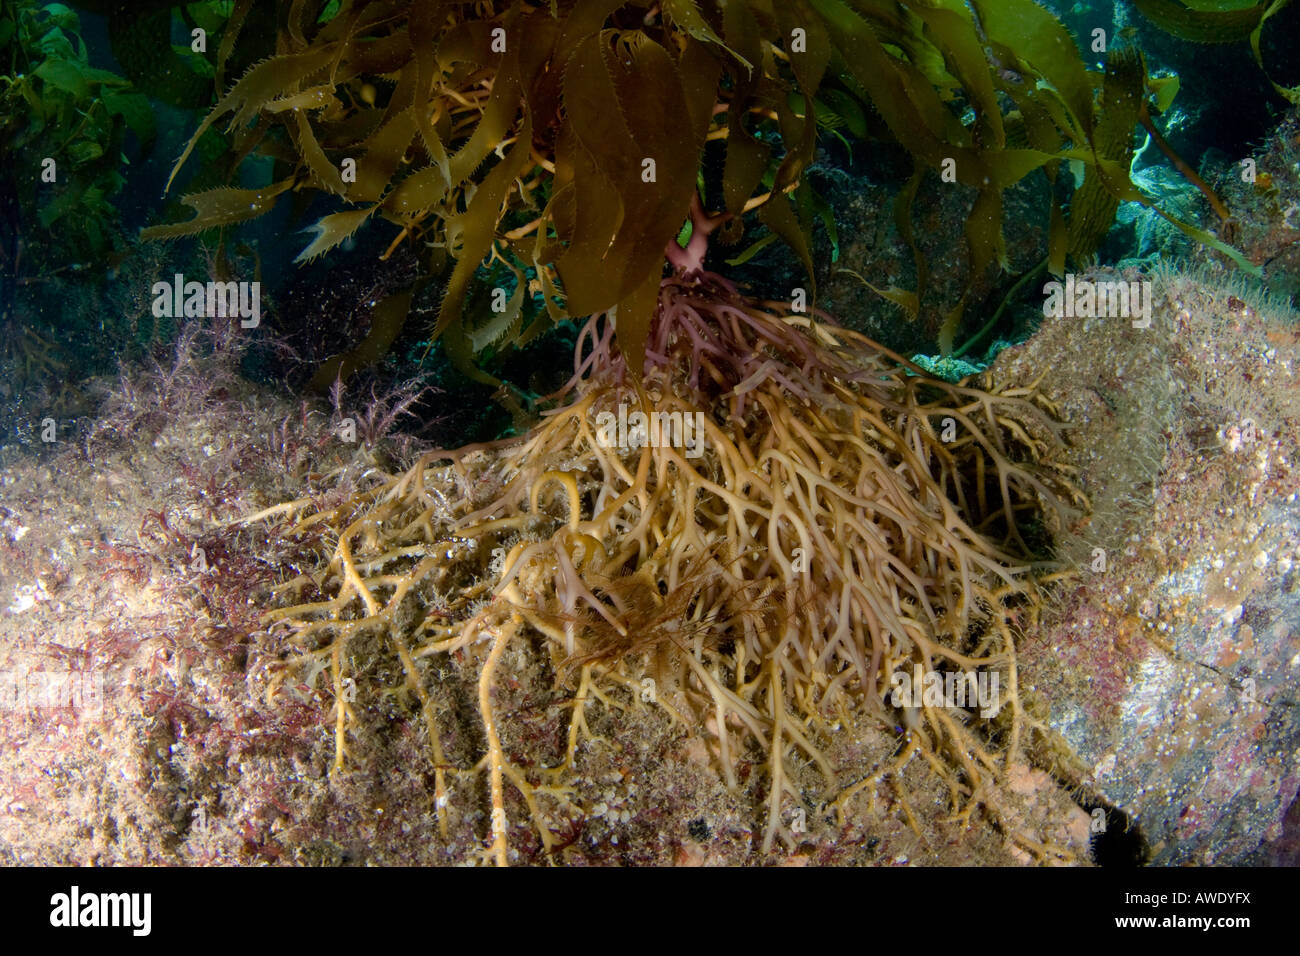 The holdfast is the root system anchoring giant kelp, Macrocystis pyrifera, to the sea floor, Catalina Island, California, USA. Stock Photo